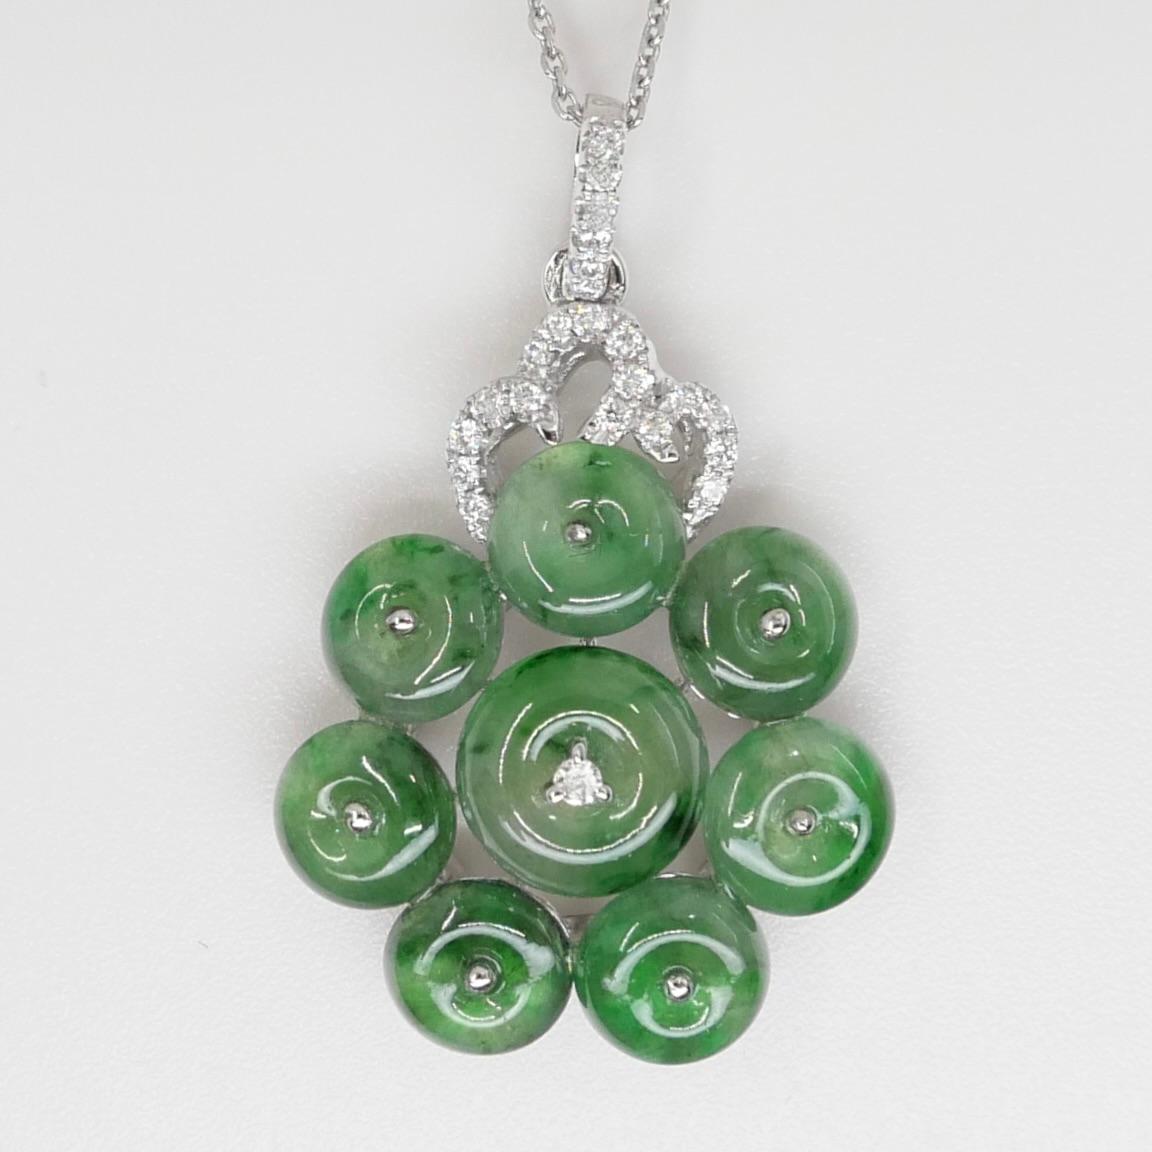 Certified Type A Cluster Icy Jade Discs & Diamond Pendant, High Translucency For Sale 3